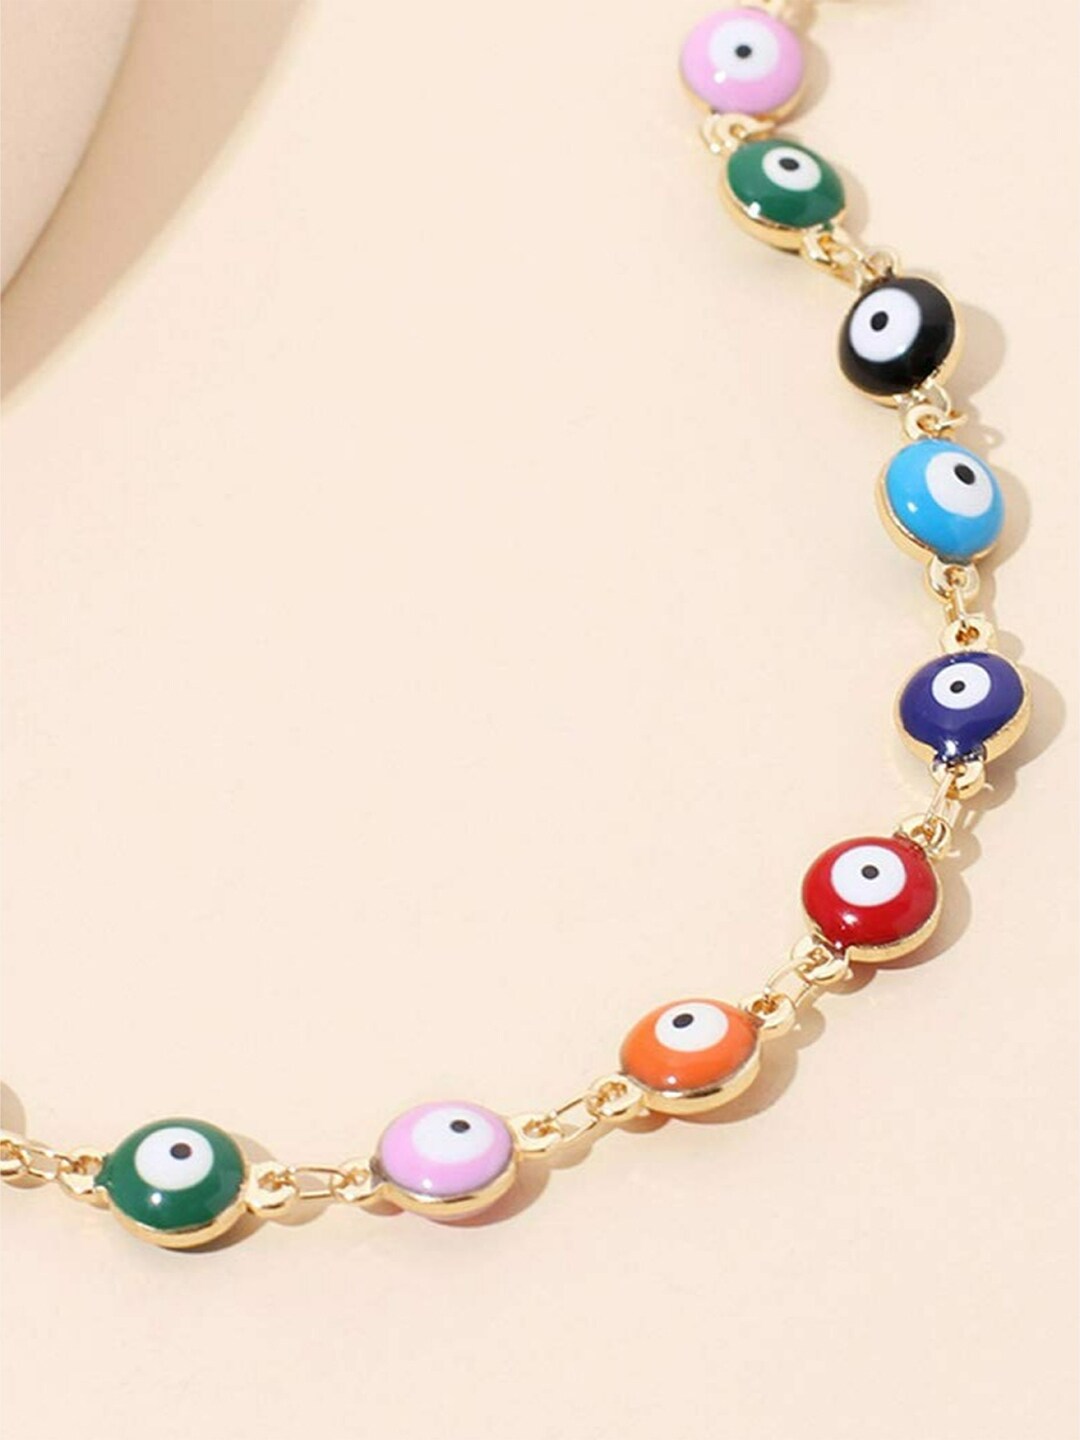 EL REGALO Women Red & Blue Gold-Plated Evileye Necklace - for Women and Girls
Style ID: 17035924